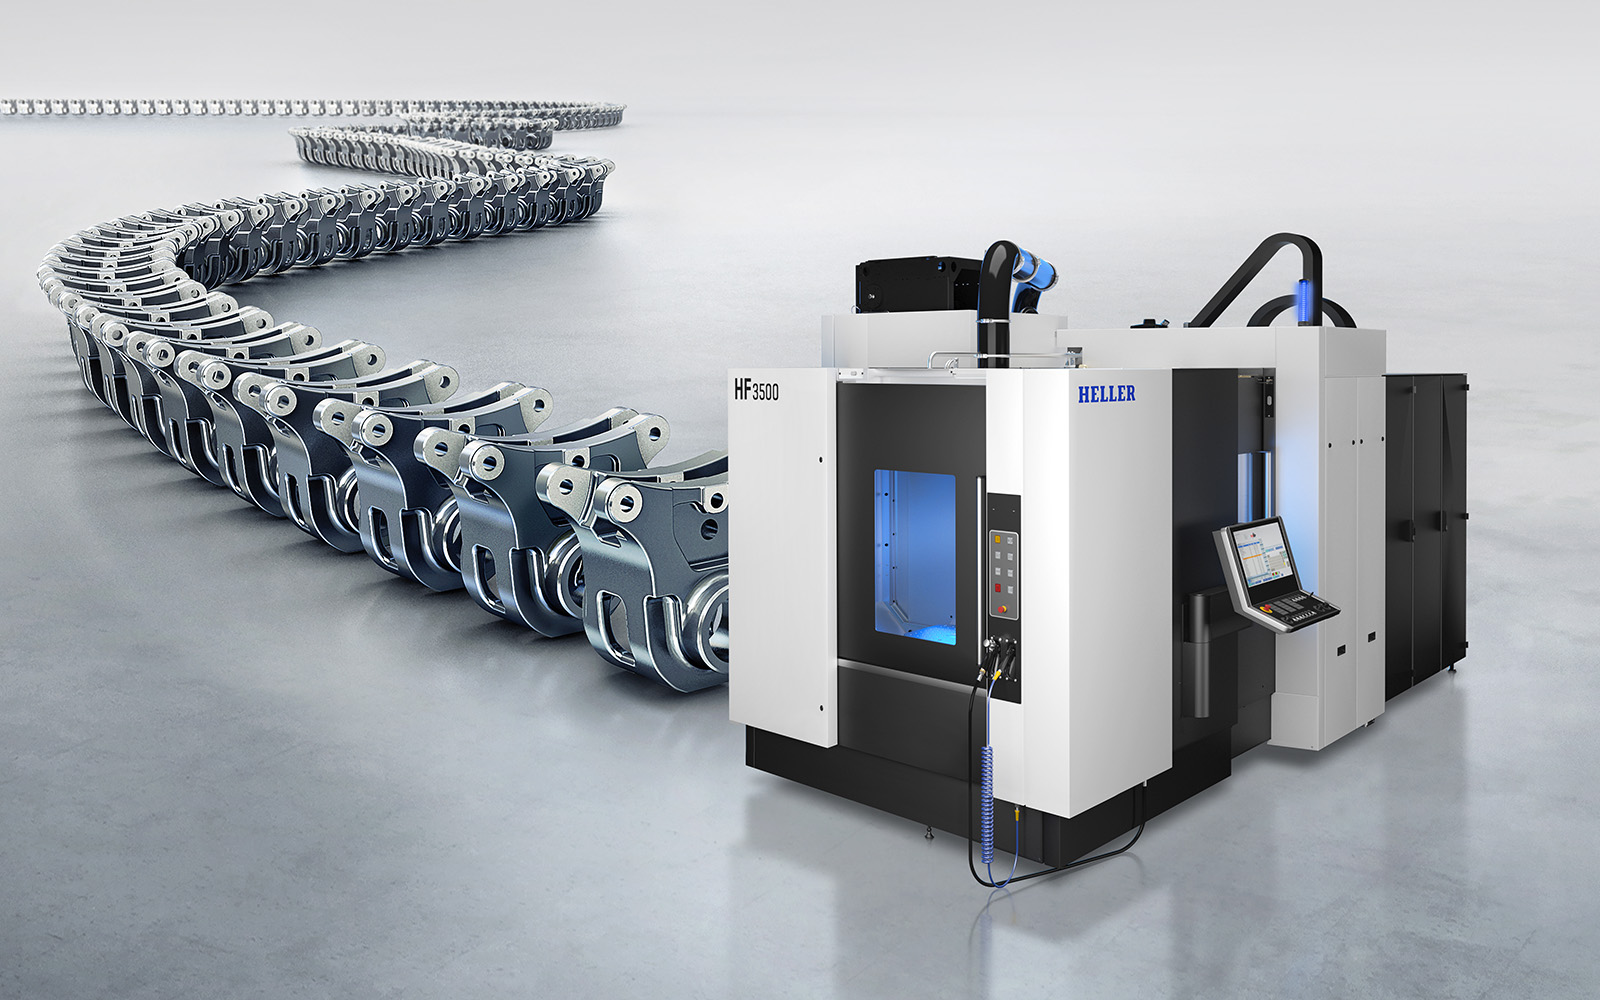 Increased productivity and versatility with the new generation of the HF